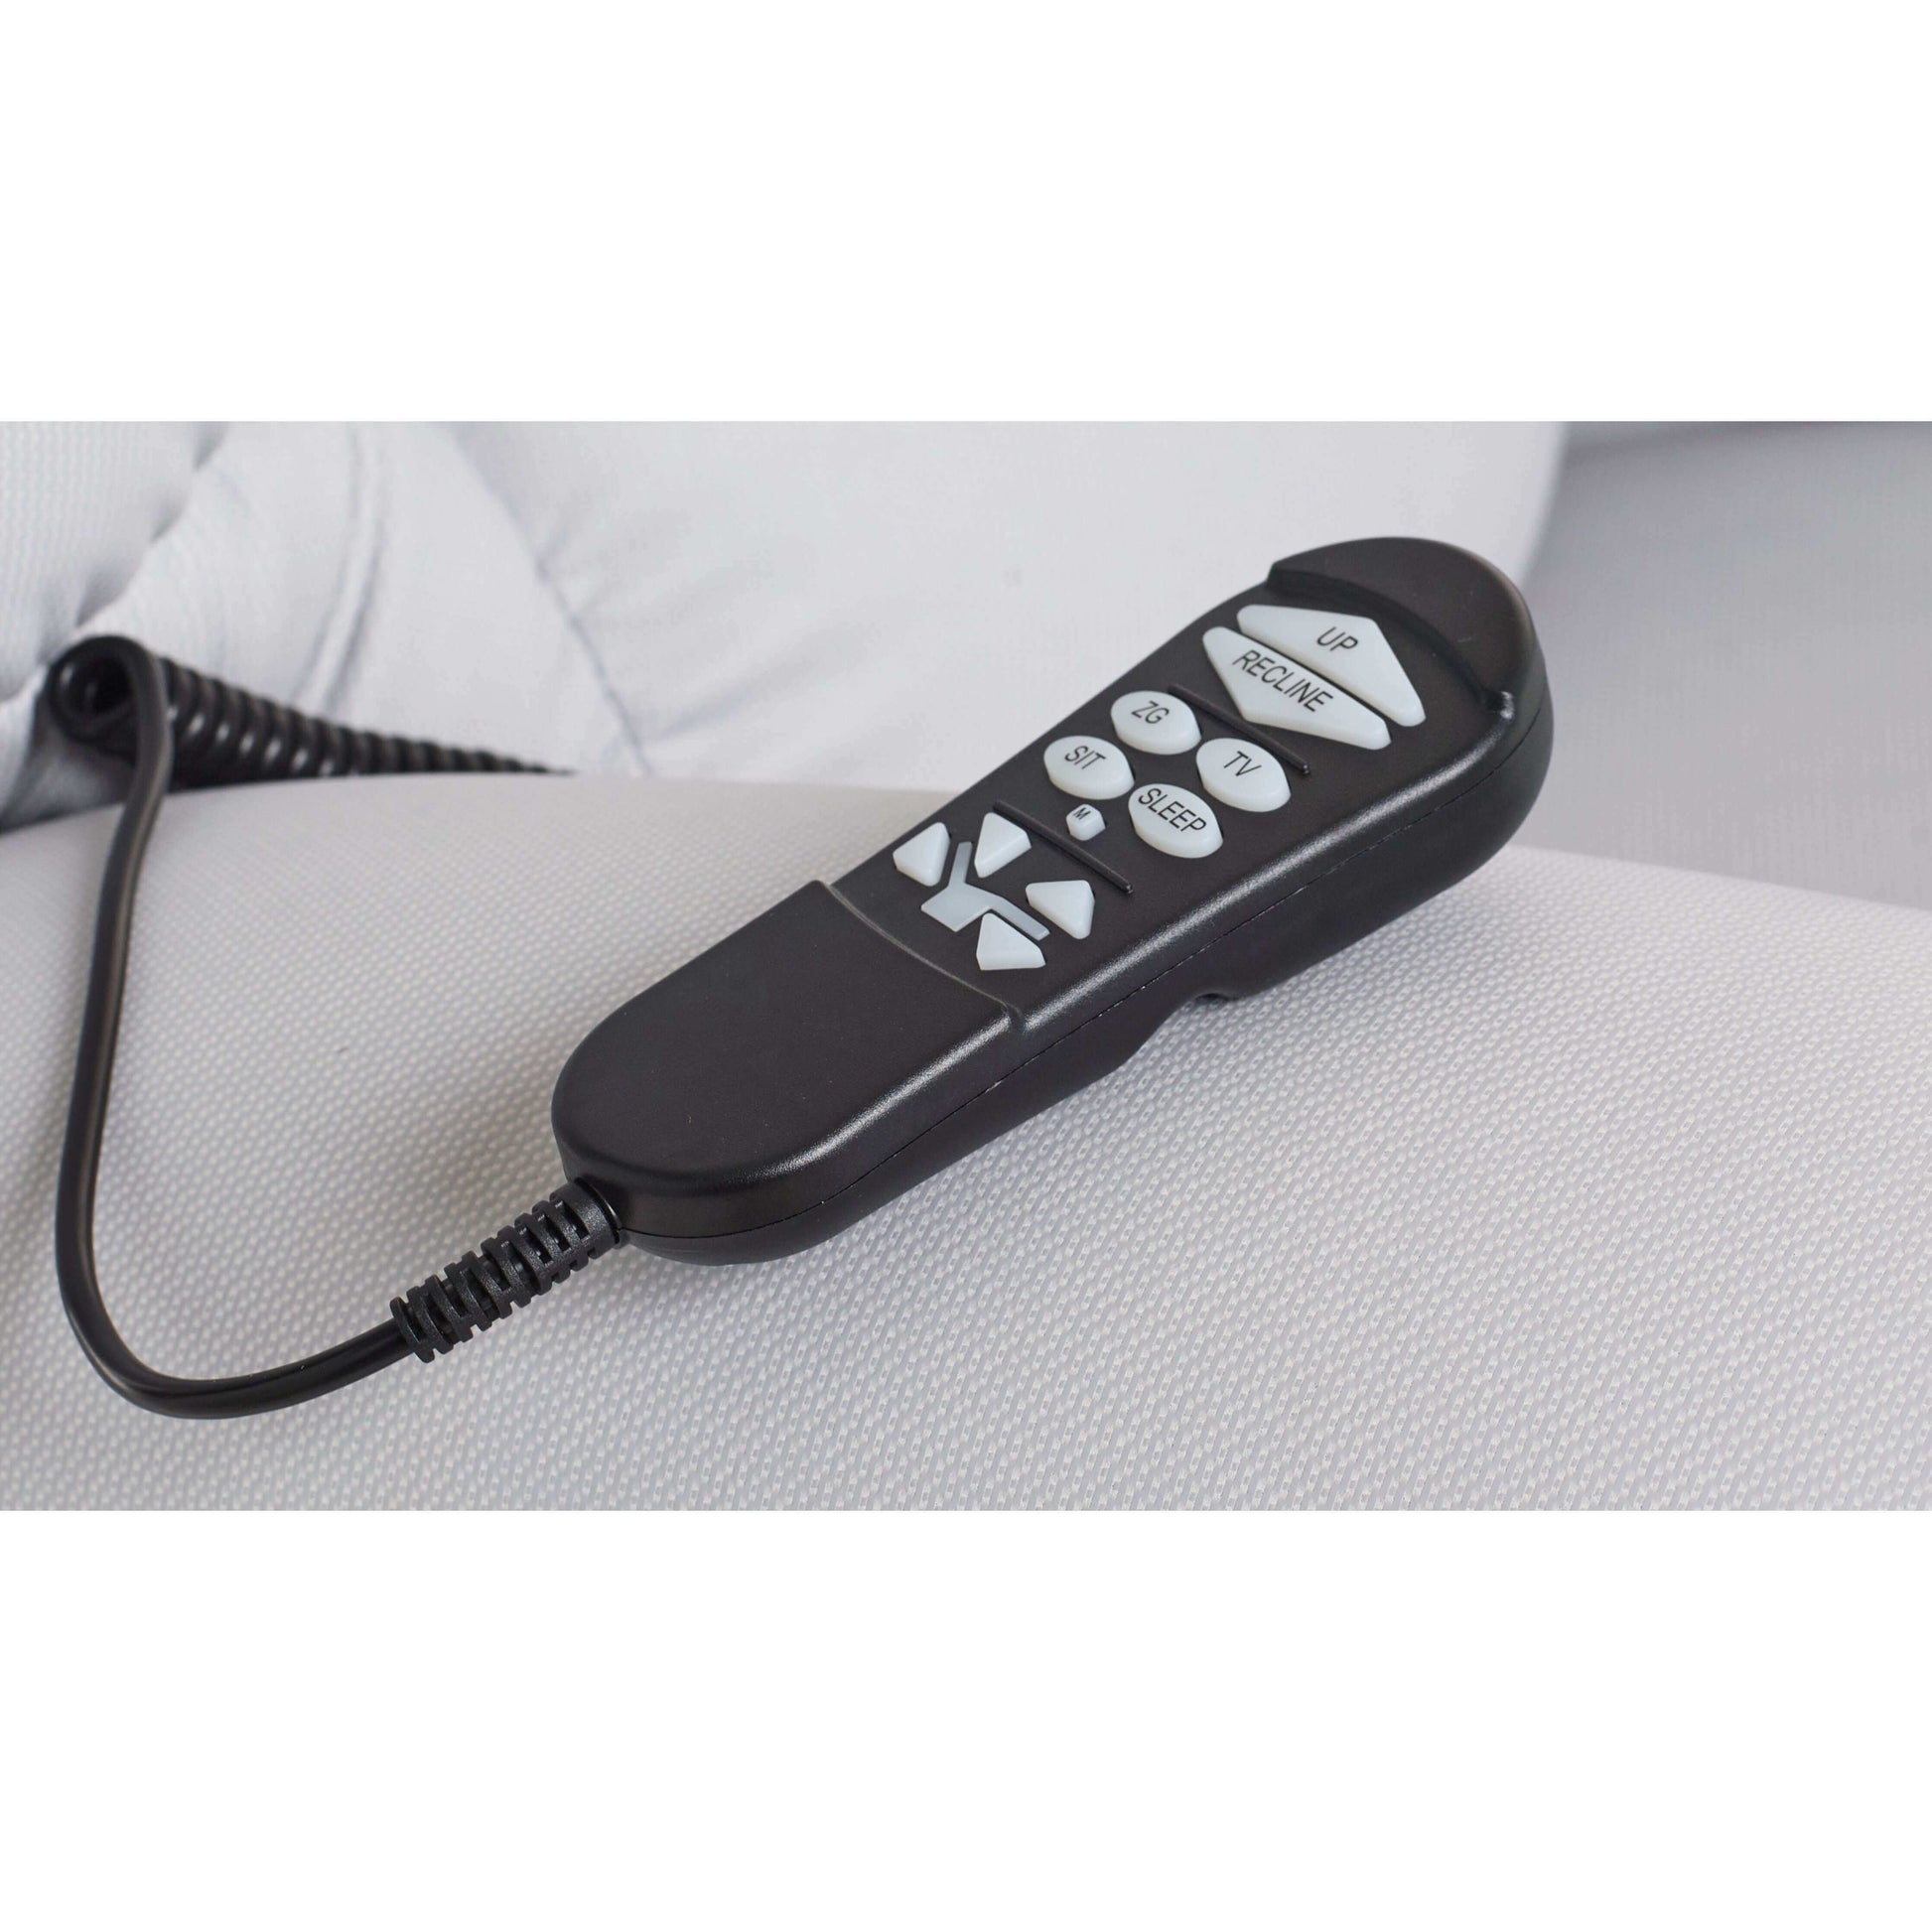 Black ergonomic remote control for Perfect Sleep Chair, featuring white buttons for multiple recline positions.